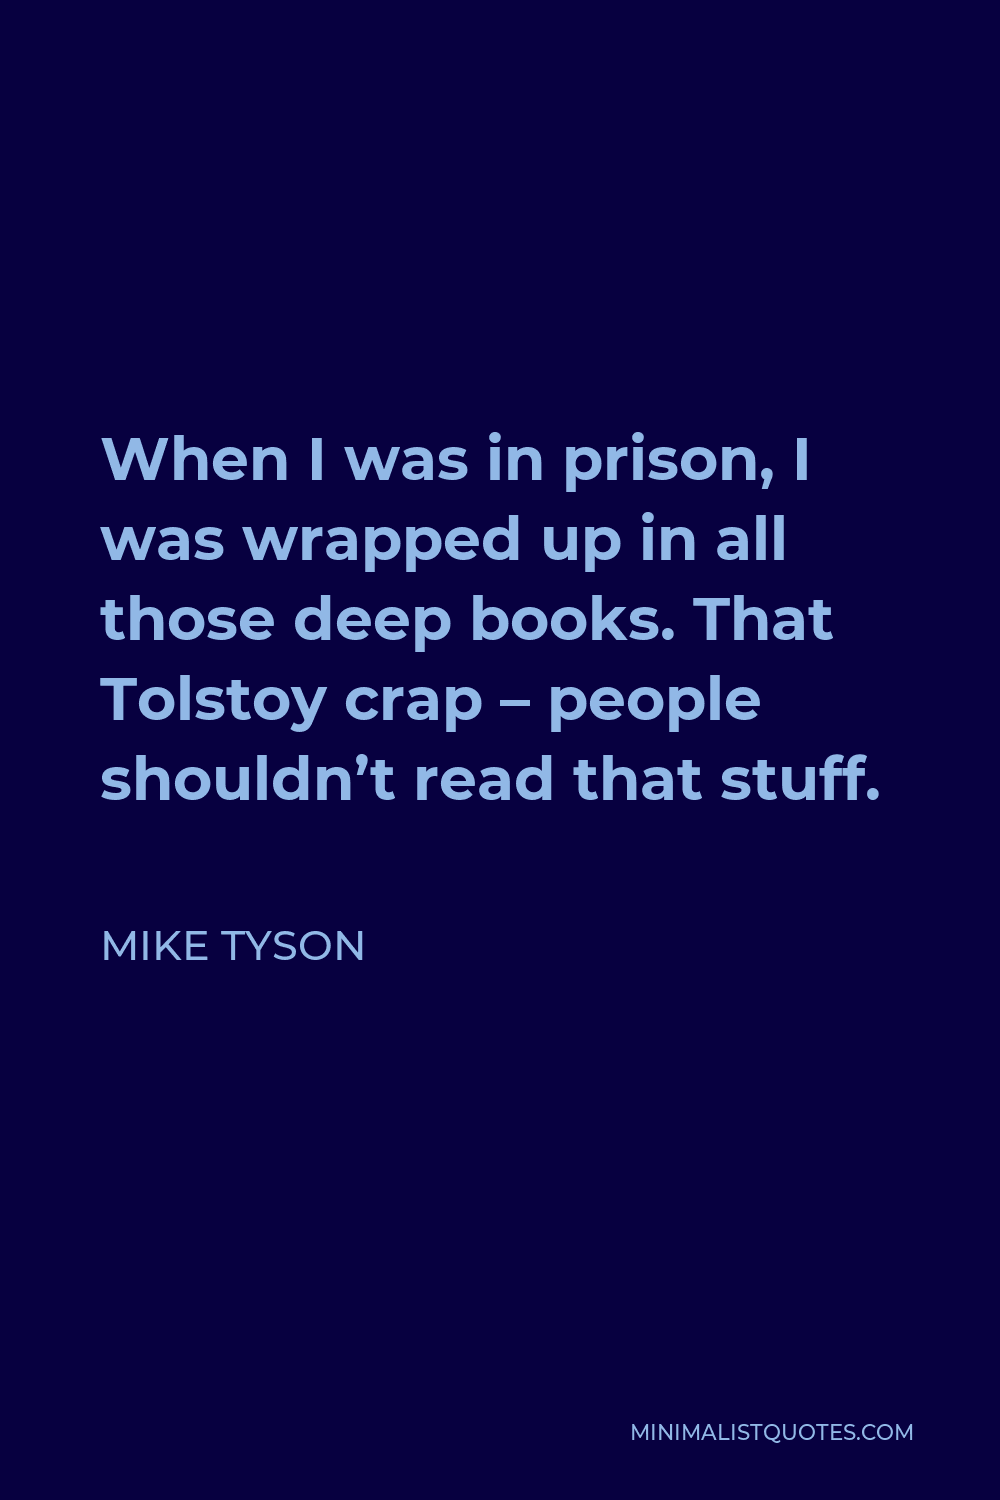 Mike Tyson Quote - When I was in prison, I was wrapped up in all those deep books. That Tolstoy crap – people shouldn’t read that stuff.